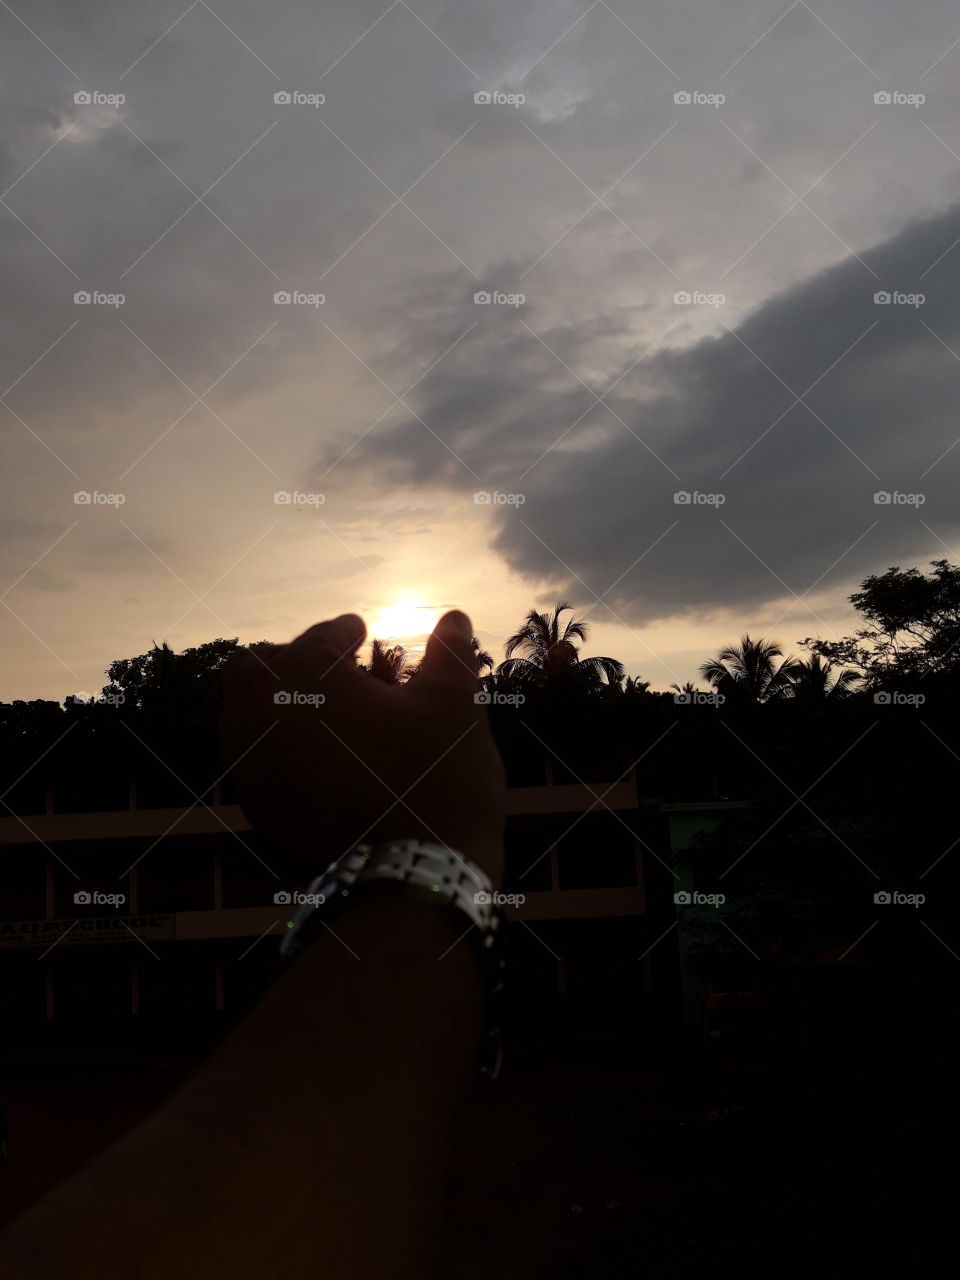 don't judge the people from away. Because,  which is seen, don't be real like this sun. we think that we can take it between our thumb and forefinger because it seen very small from away, But in real, it is very huge.